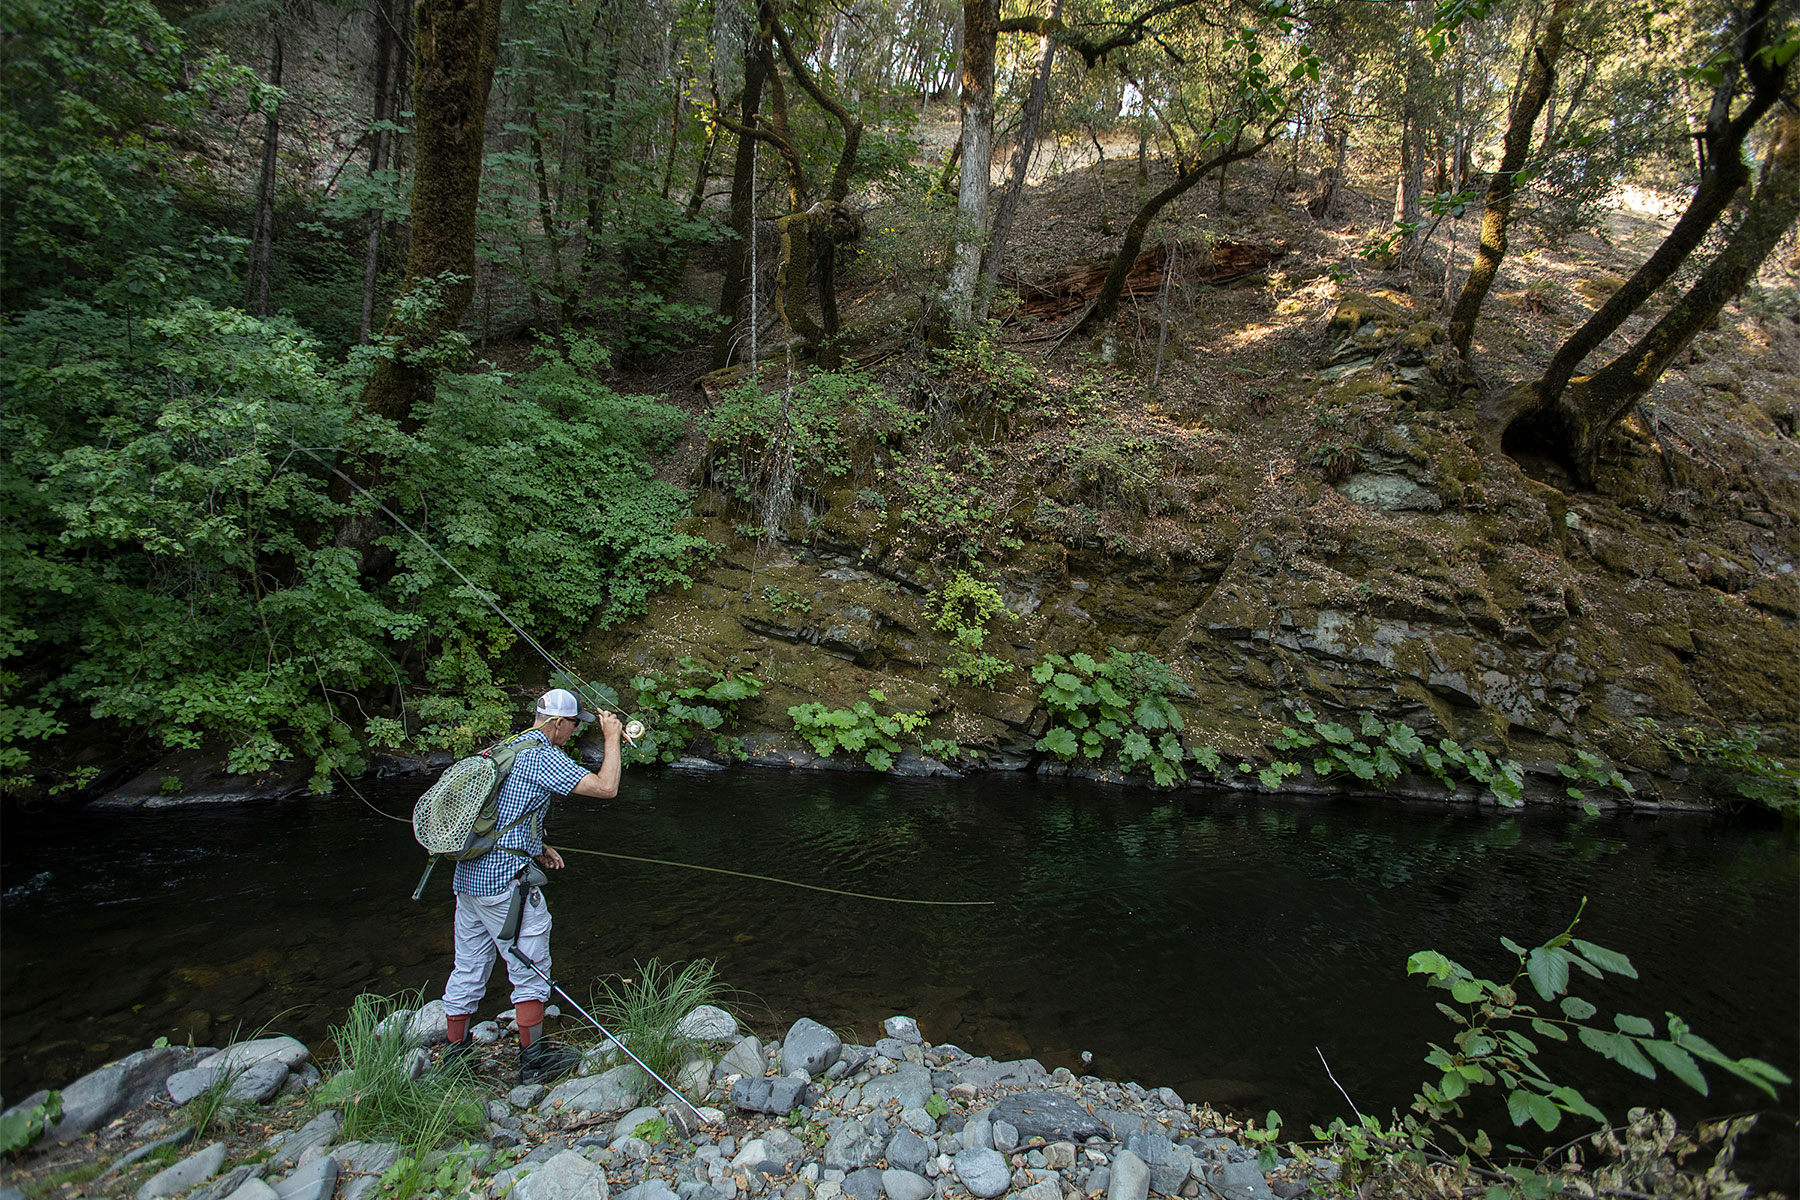 Private Waters in Northern California - The Fly Shop